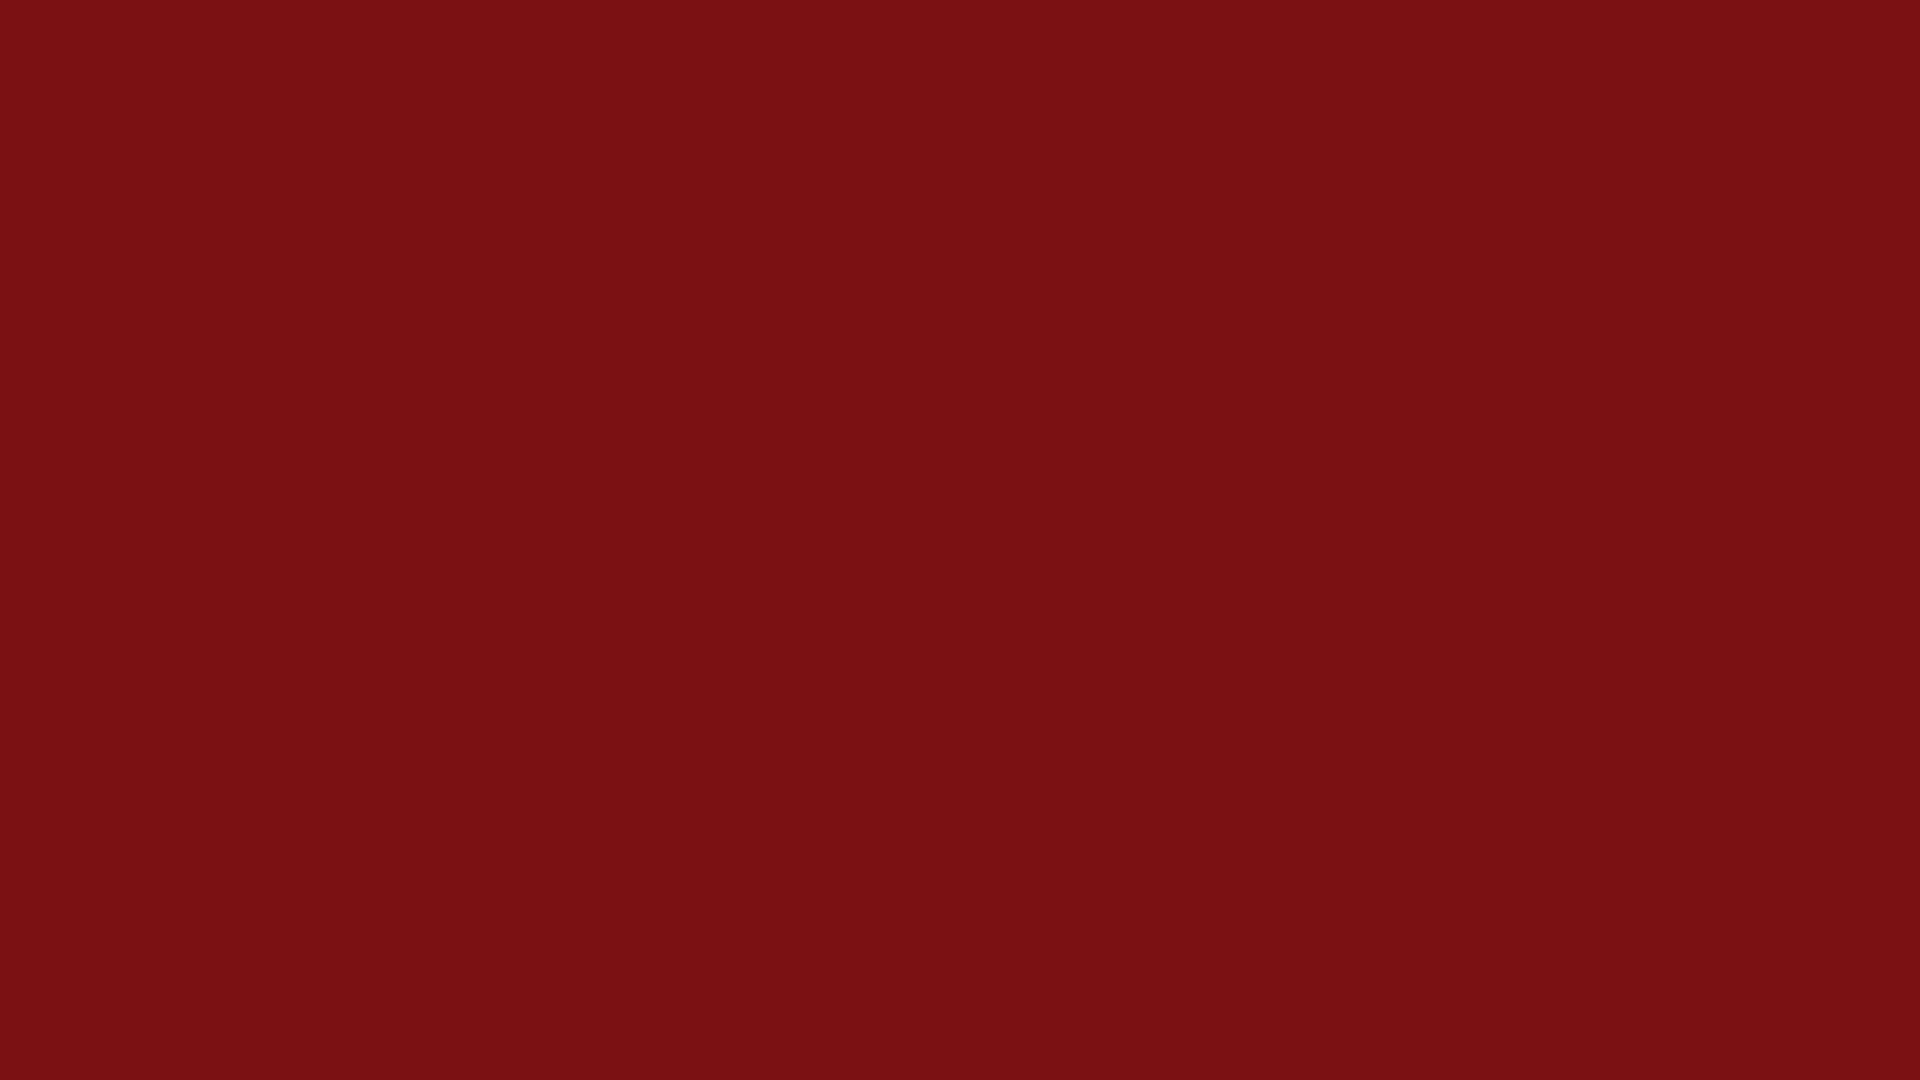 Maroon Wall Colors Trend Home Design And Decor